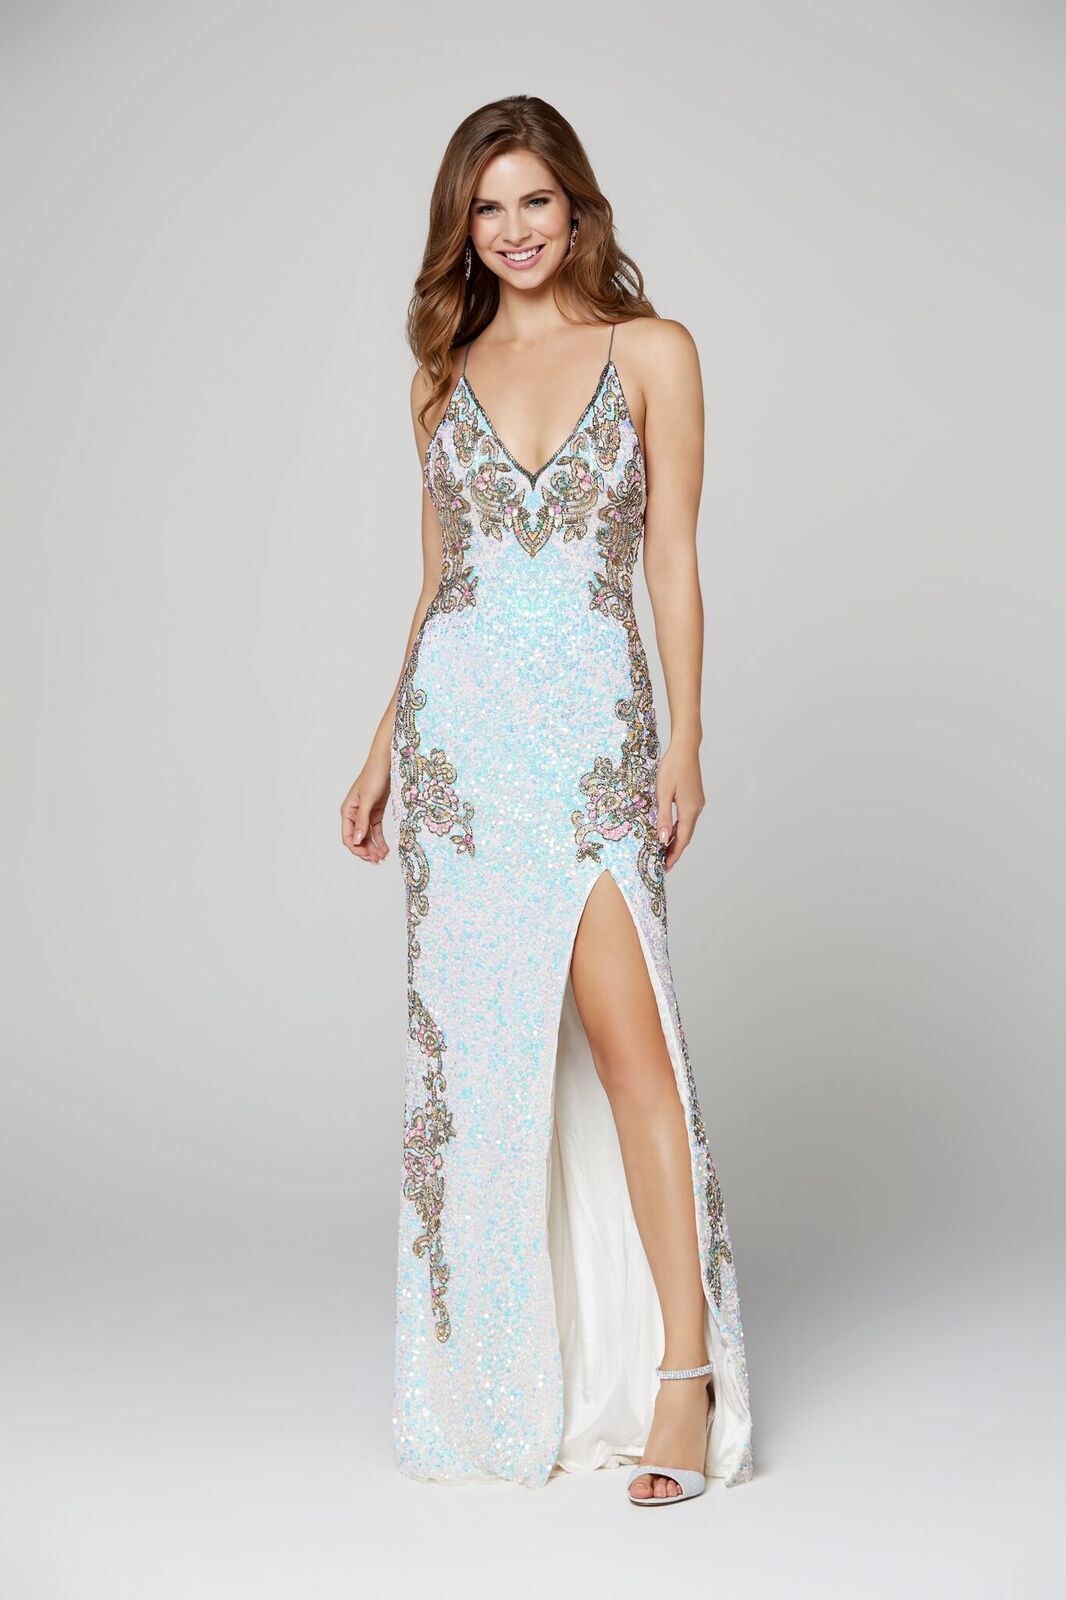 Primavera Couture 3211 is a Long sequin Embellished Evening Gown Formal Dress  Available Colors: Midnight Multi,  Platinum Multi, Red, Black, Charcoal, Ivory   Fully beaded prom dress with floral pattern and side slit. Long Sequin Gown featuring a v neckline. slit in the fitted skirt.